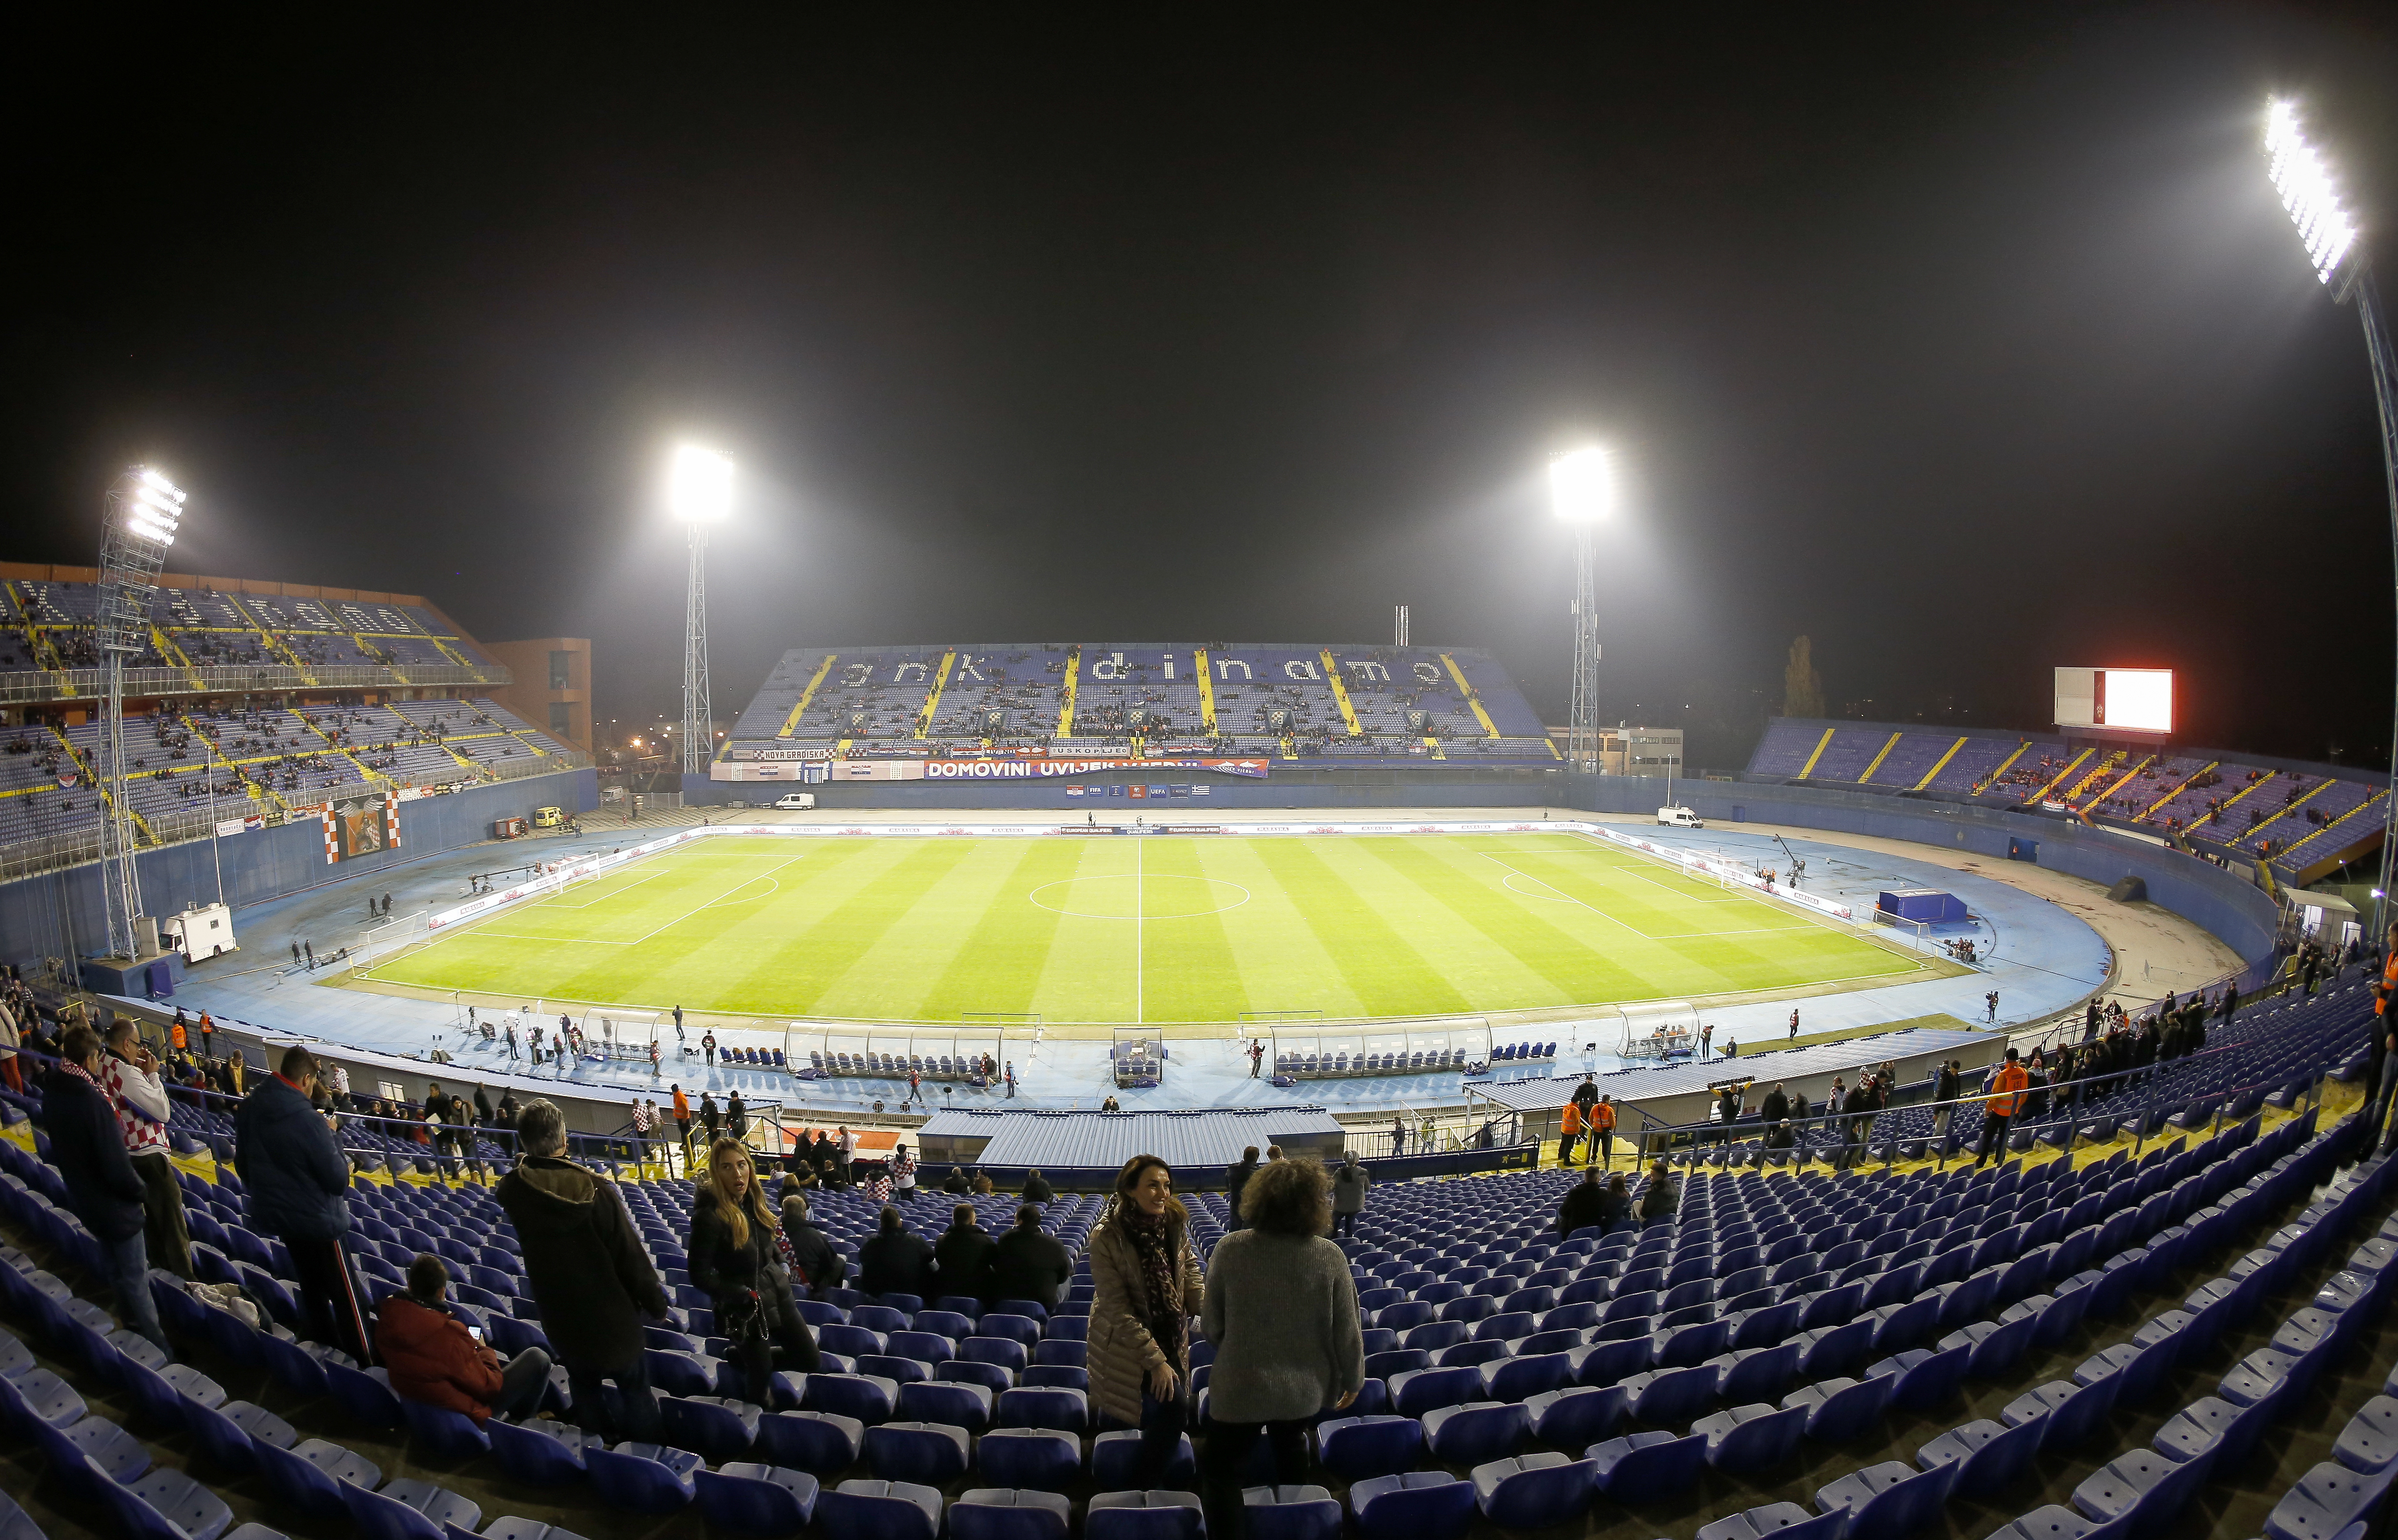 ZAGREB, CROATIA - NOVEMBER 09: General view of the stadium Maksimir prior to the FIFA 2018 World Cup Qualifier Play-Off: First Leg between Croatia and Greece at Stadion Maksimir on November 9, 2017 in Zagreb, Croatia (Photo by Srdjan Stevanovic/Getty Images)